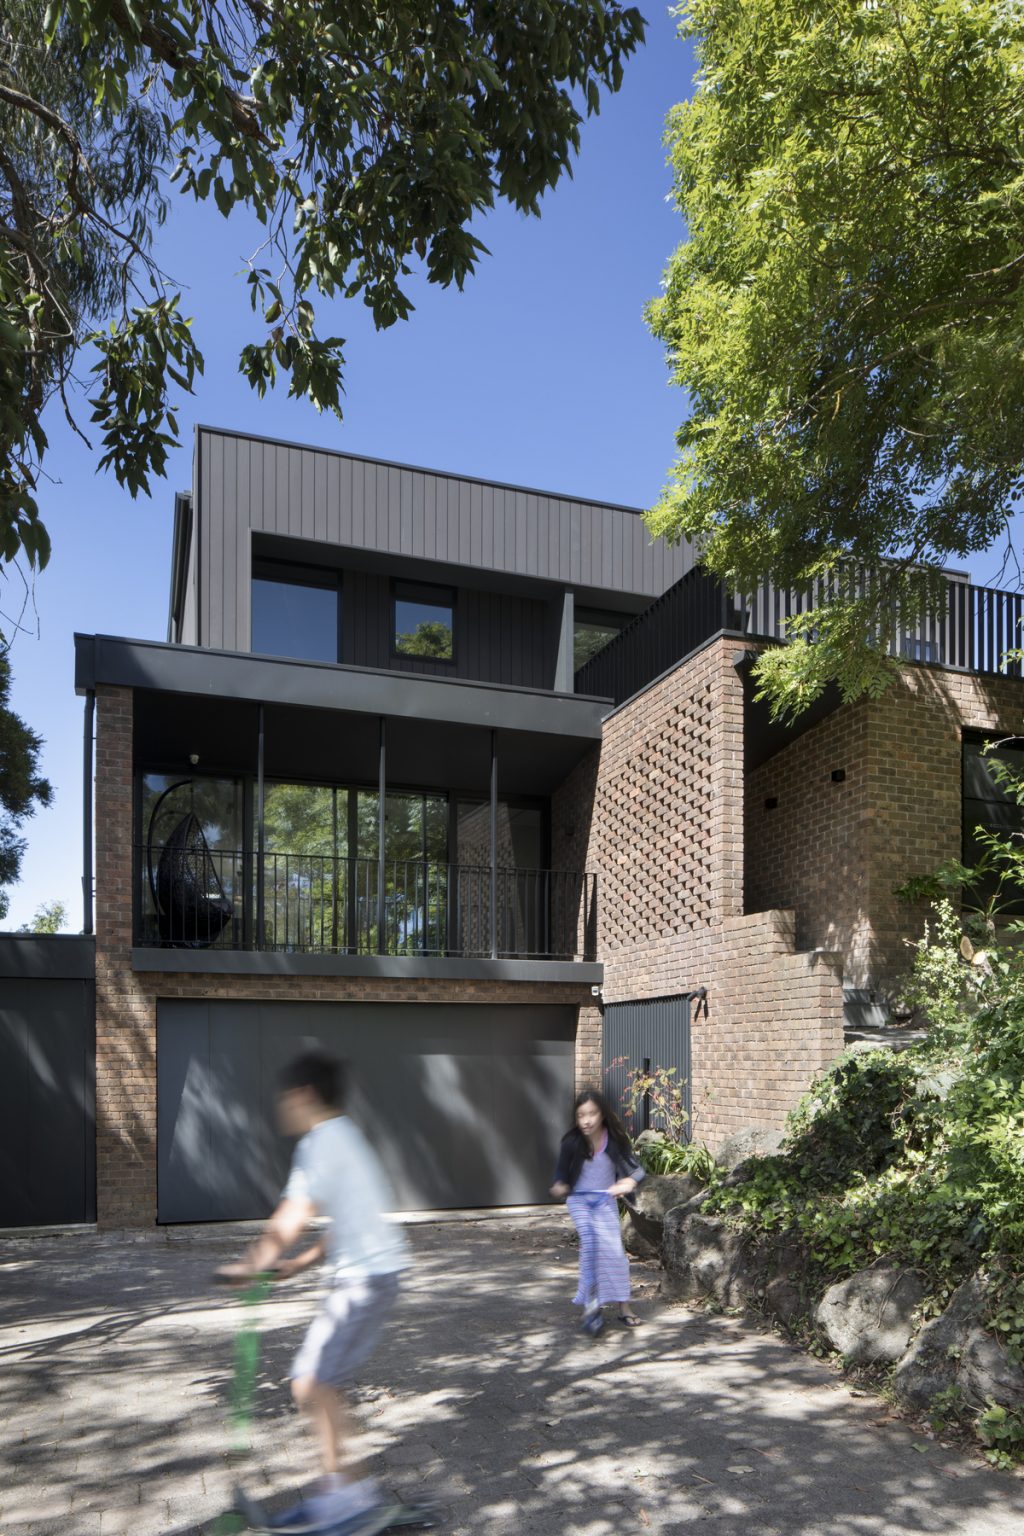 A Complete Renovation Of A 1970s Double Brick Family Home